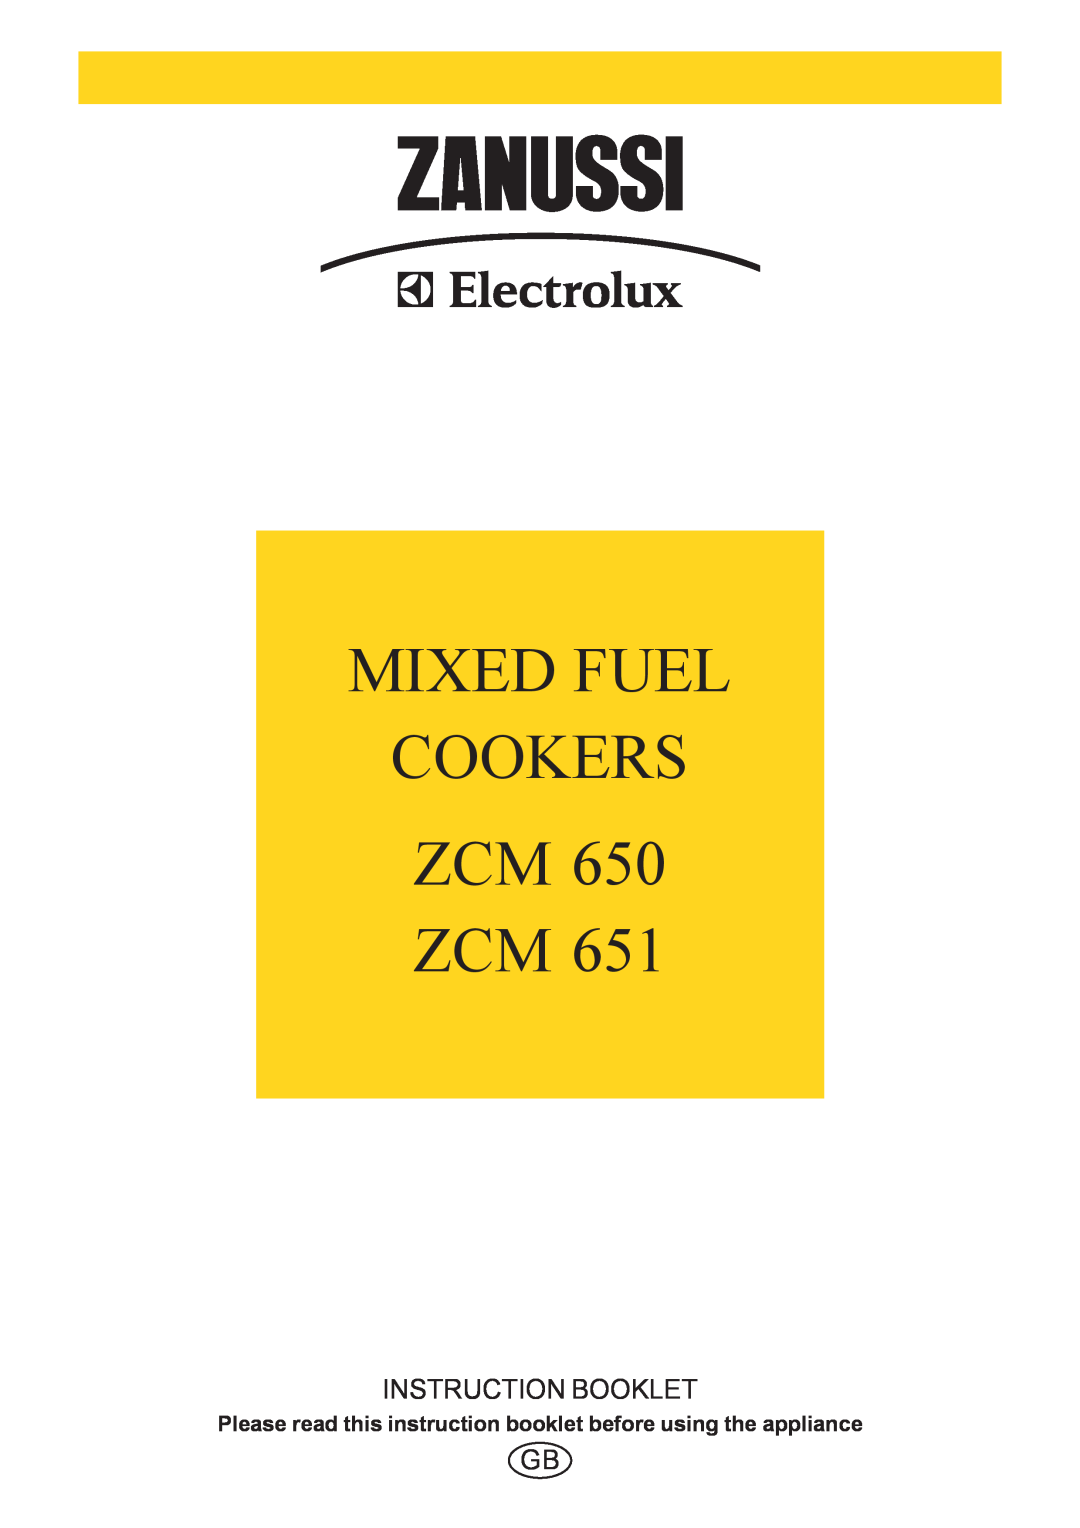 Zanussi ZCM 650 ZCM 651 manual Please read this instruction booklet before using the appliance, Mixed Fuel Cookers Zcm Zcm 